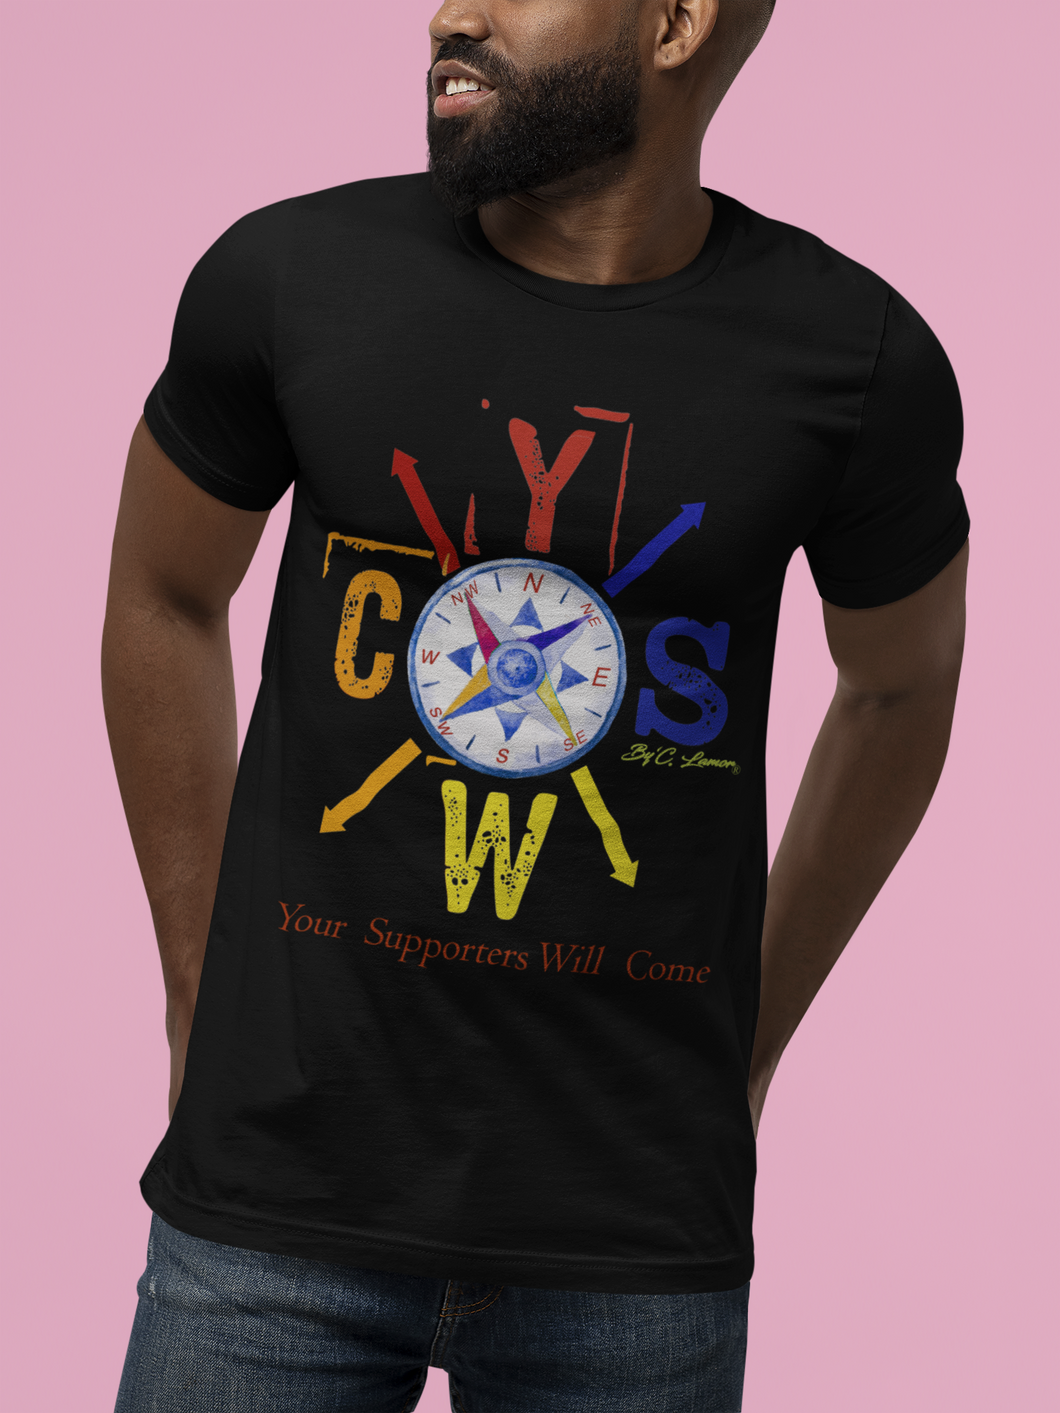 By' C. Lamor- Your Supporters Will Come Compass, Black tshirt, in the colors Red, Blue, Orange and Yellow for Gentlemen